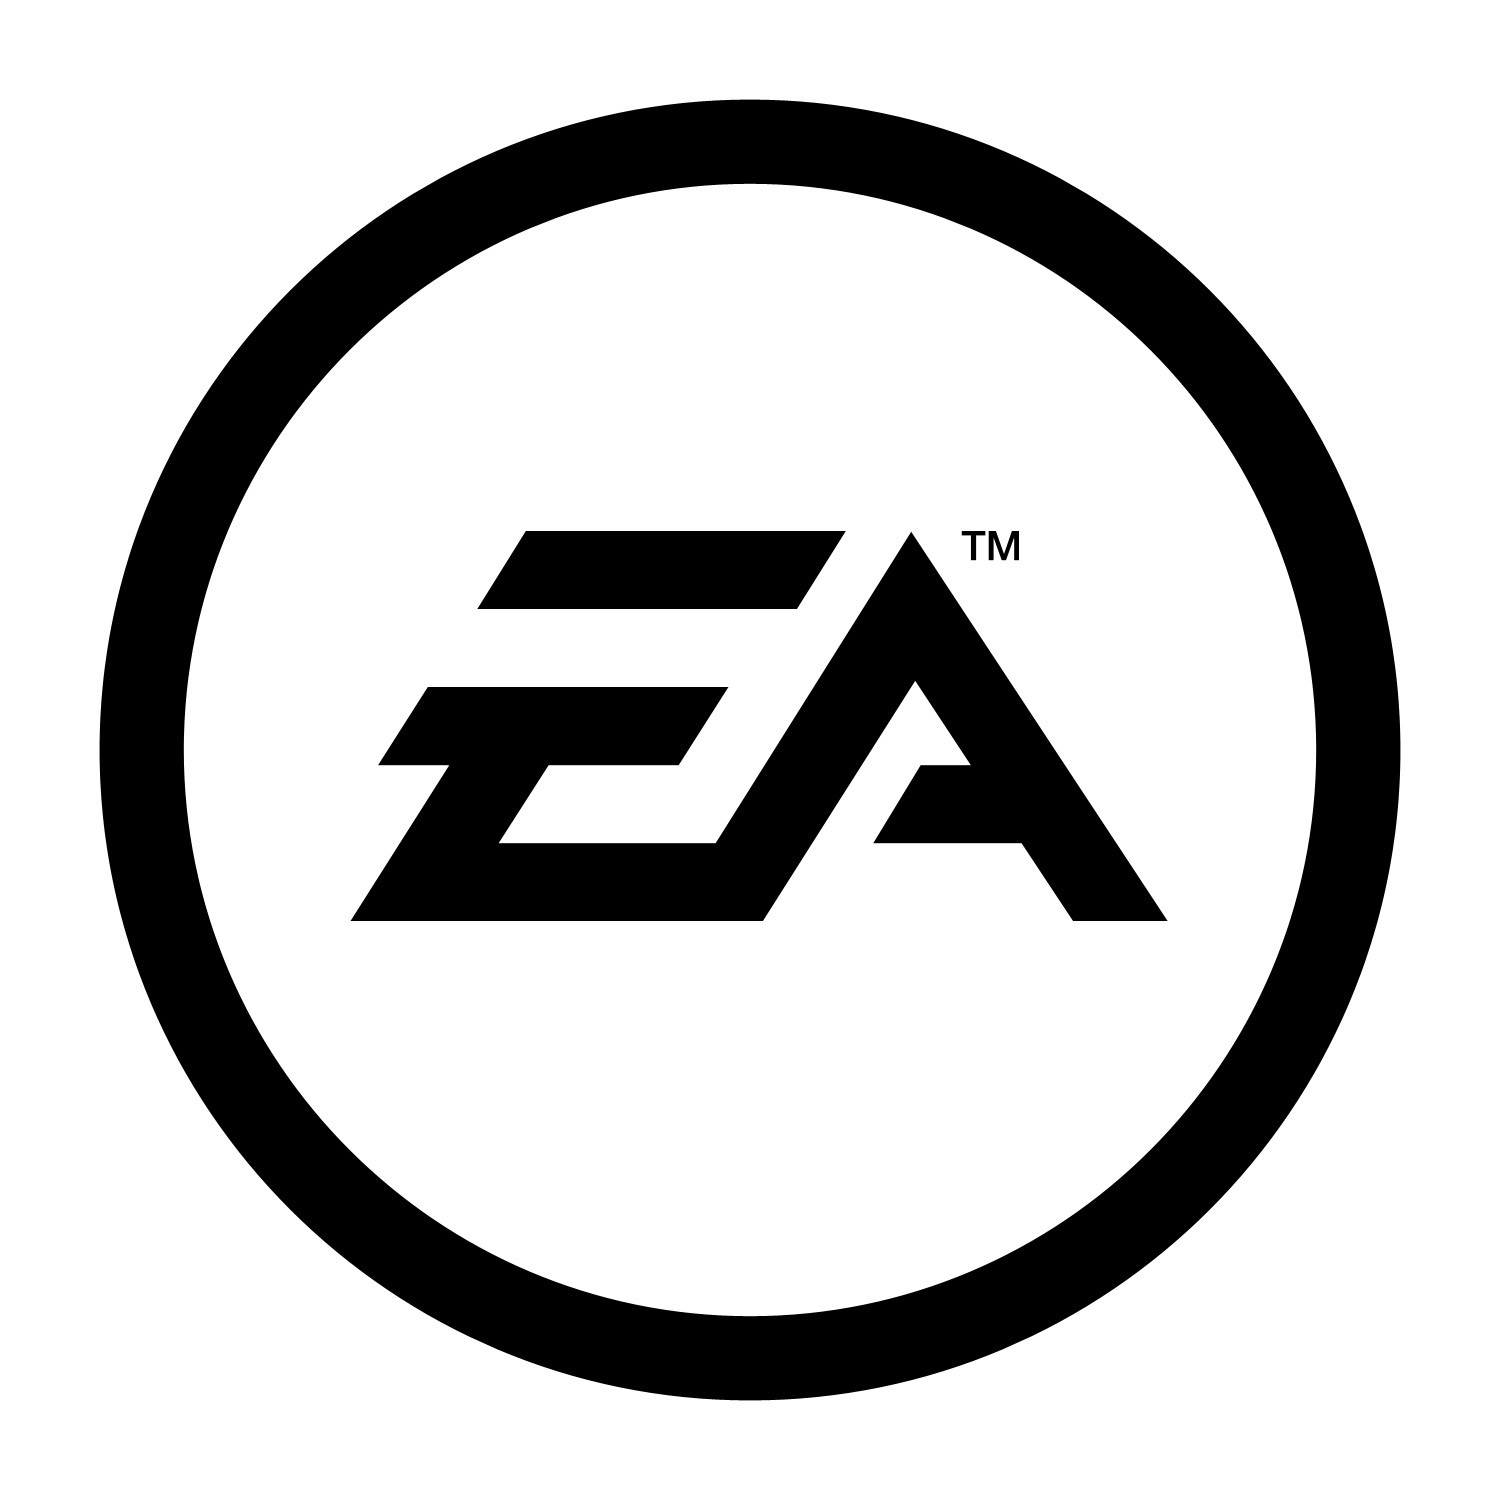 Electronic Arts Ushers in a New Generation of Mobile Gaming with Game  Changing Updates for New Season of EA SPORTS FIFA Mobile